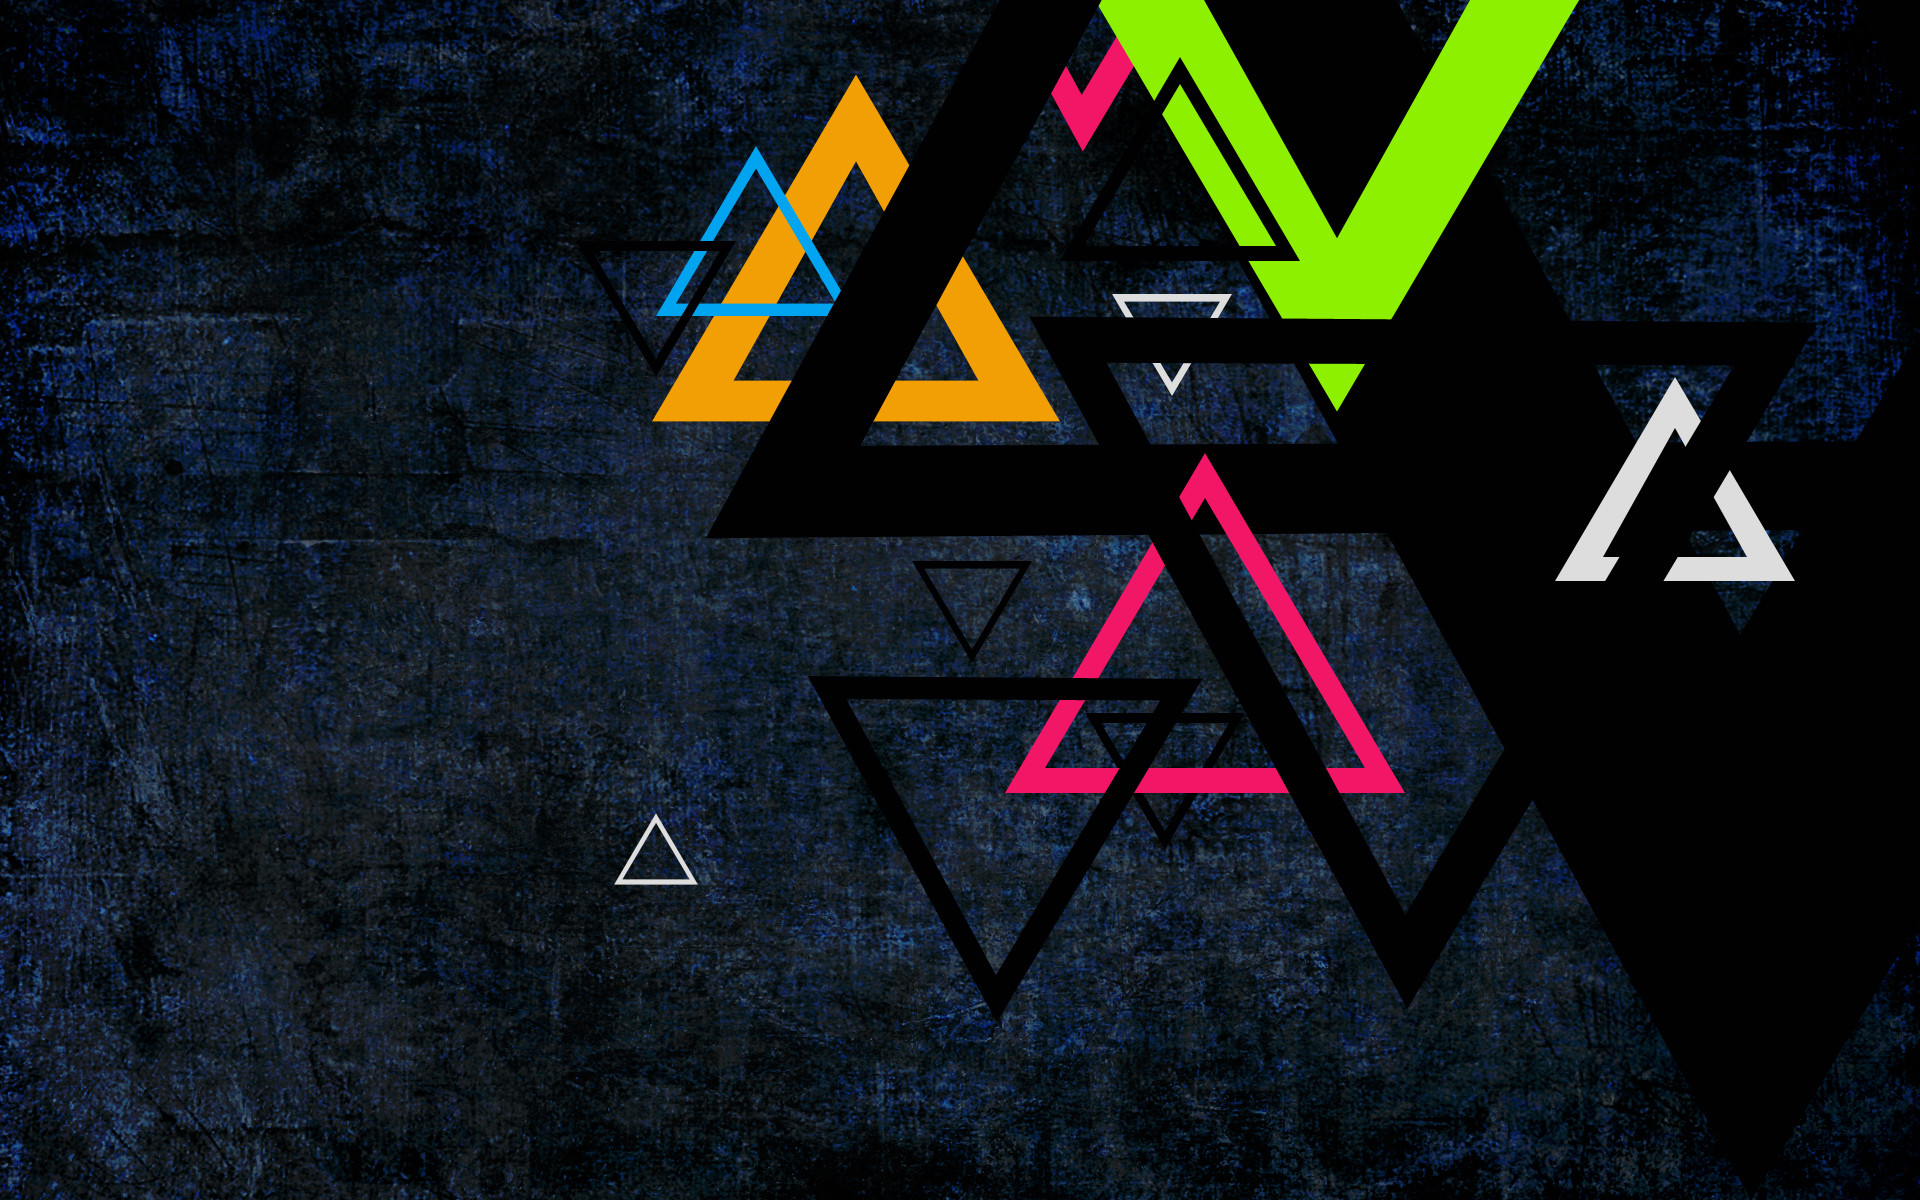 1920x1200 Hope you like this hd retro wallpapers with abstract shapes pack.Enjoy .